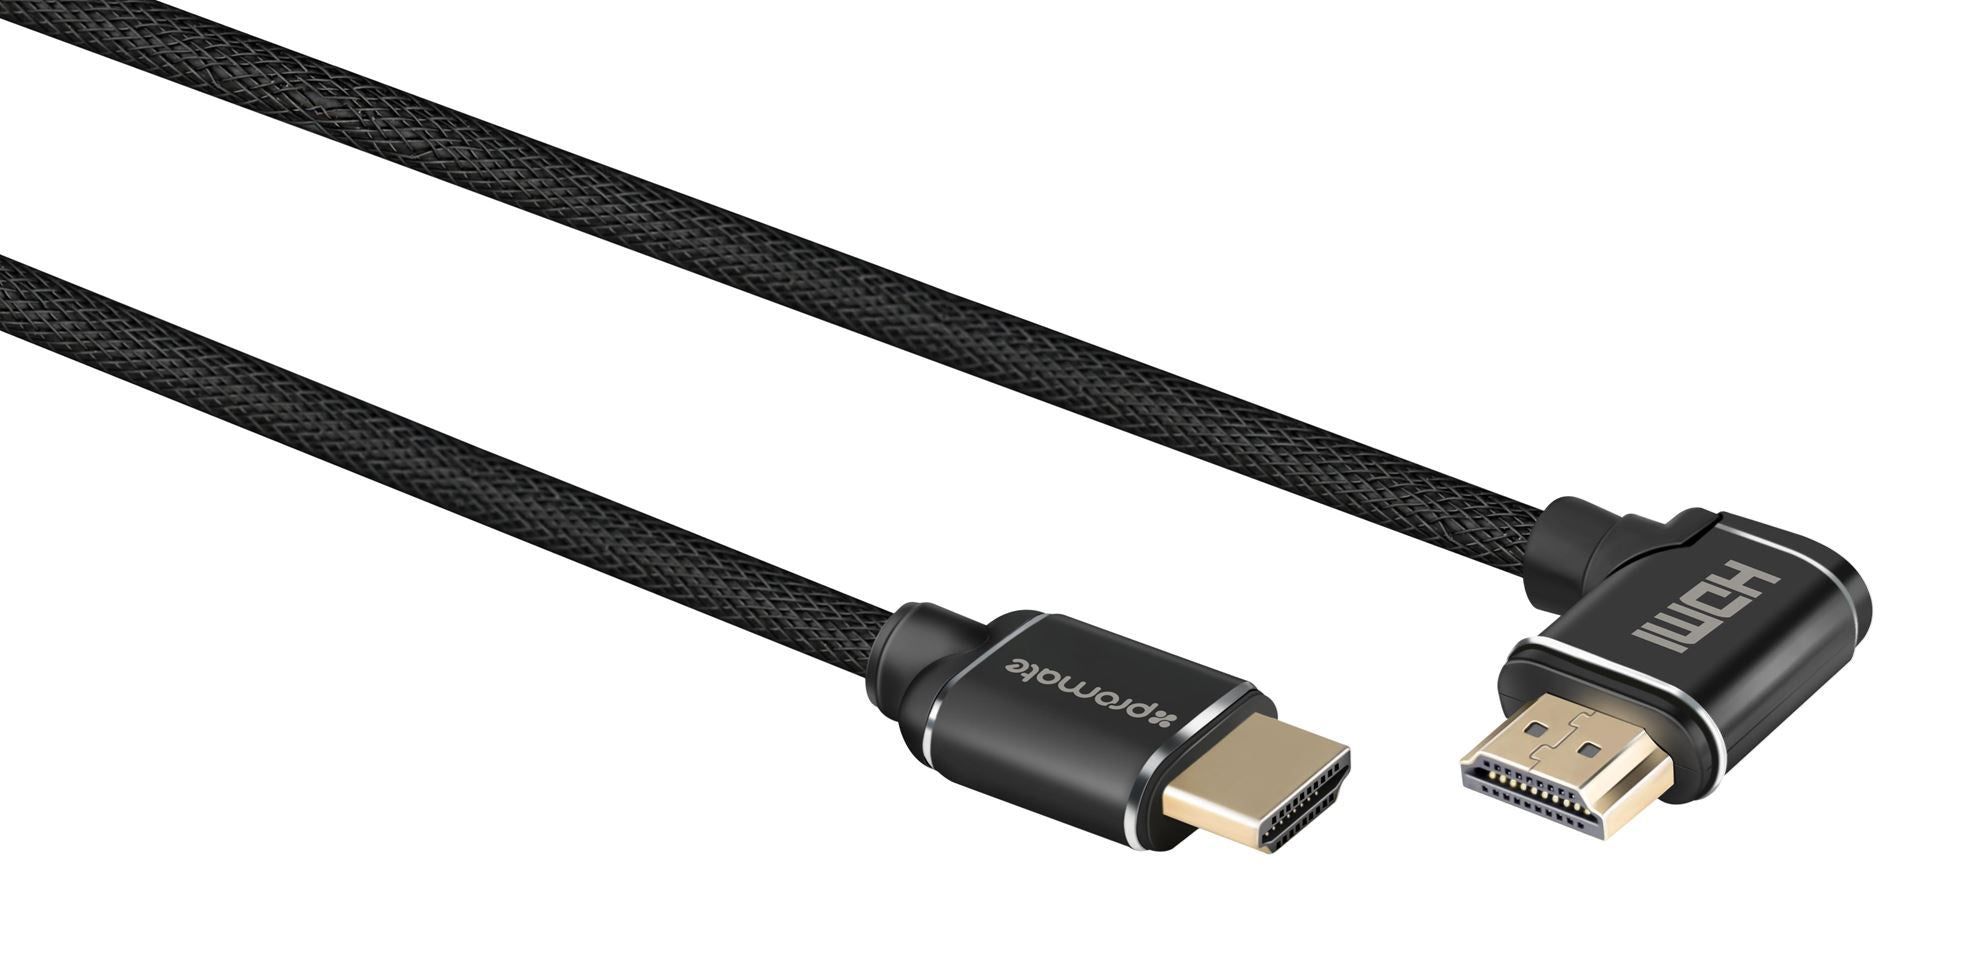 PROMATE_3m_4K_HDMI_right_angle_Cable._24K_Gold_plated._High-Speed_Ethernet._3D_support._Mesh_Braided_cable._Long_bend_lifespan._Max_Res:_4K@60Hz_(4096X2160)_July_Sale_-_20%_OFF 1679